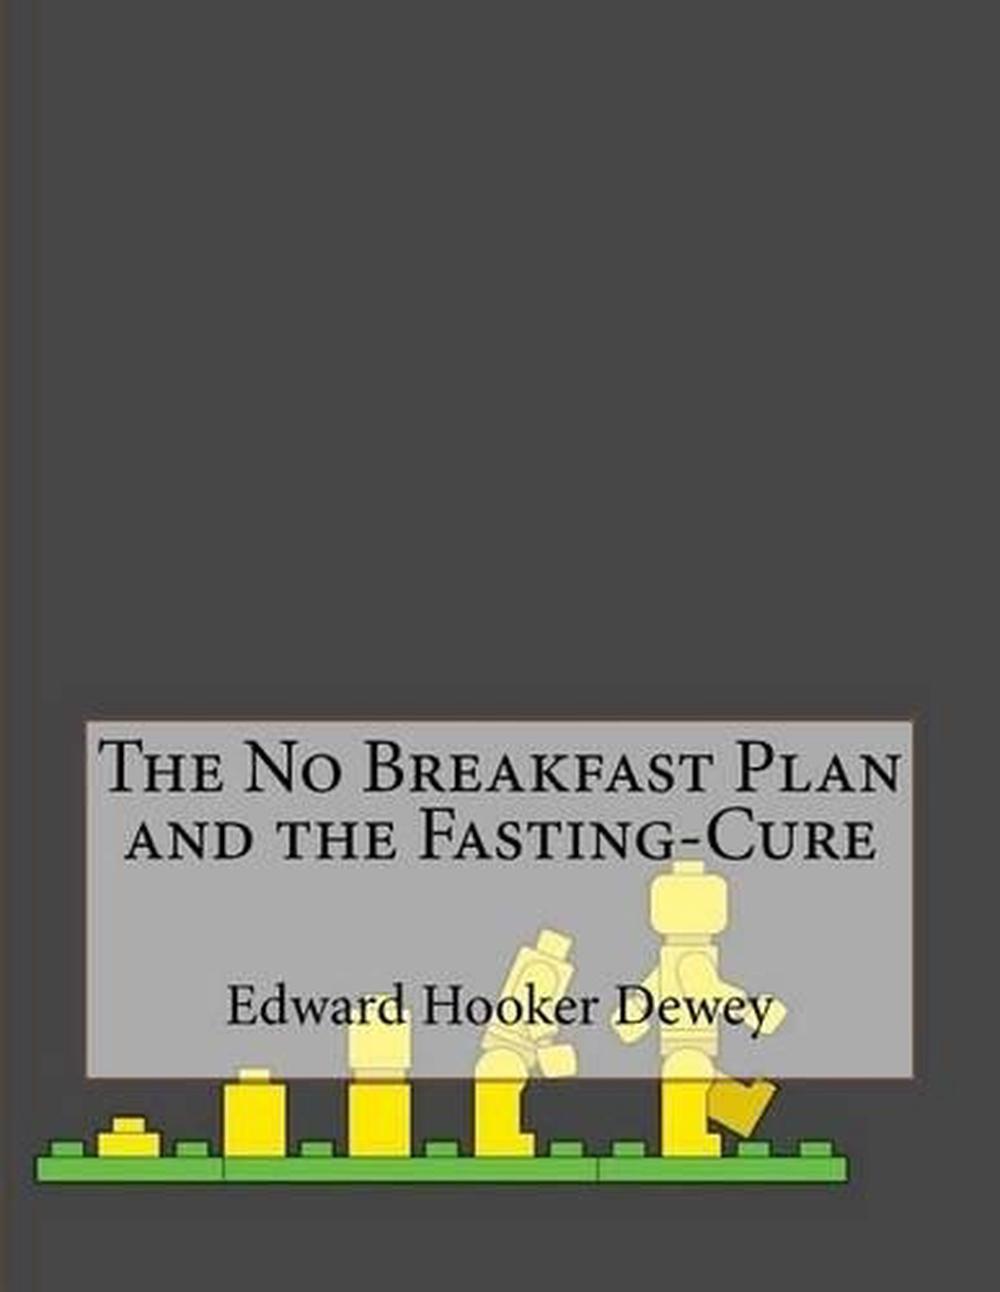 The No Breakfast Plan and the FastingCure by Edward Hooker Dewey